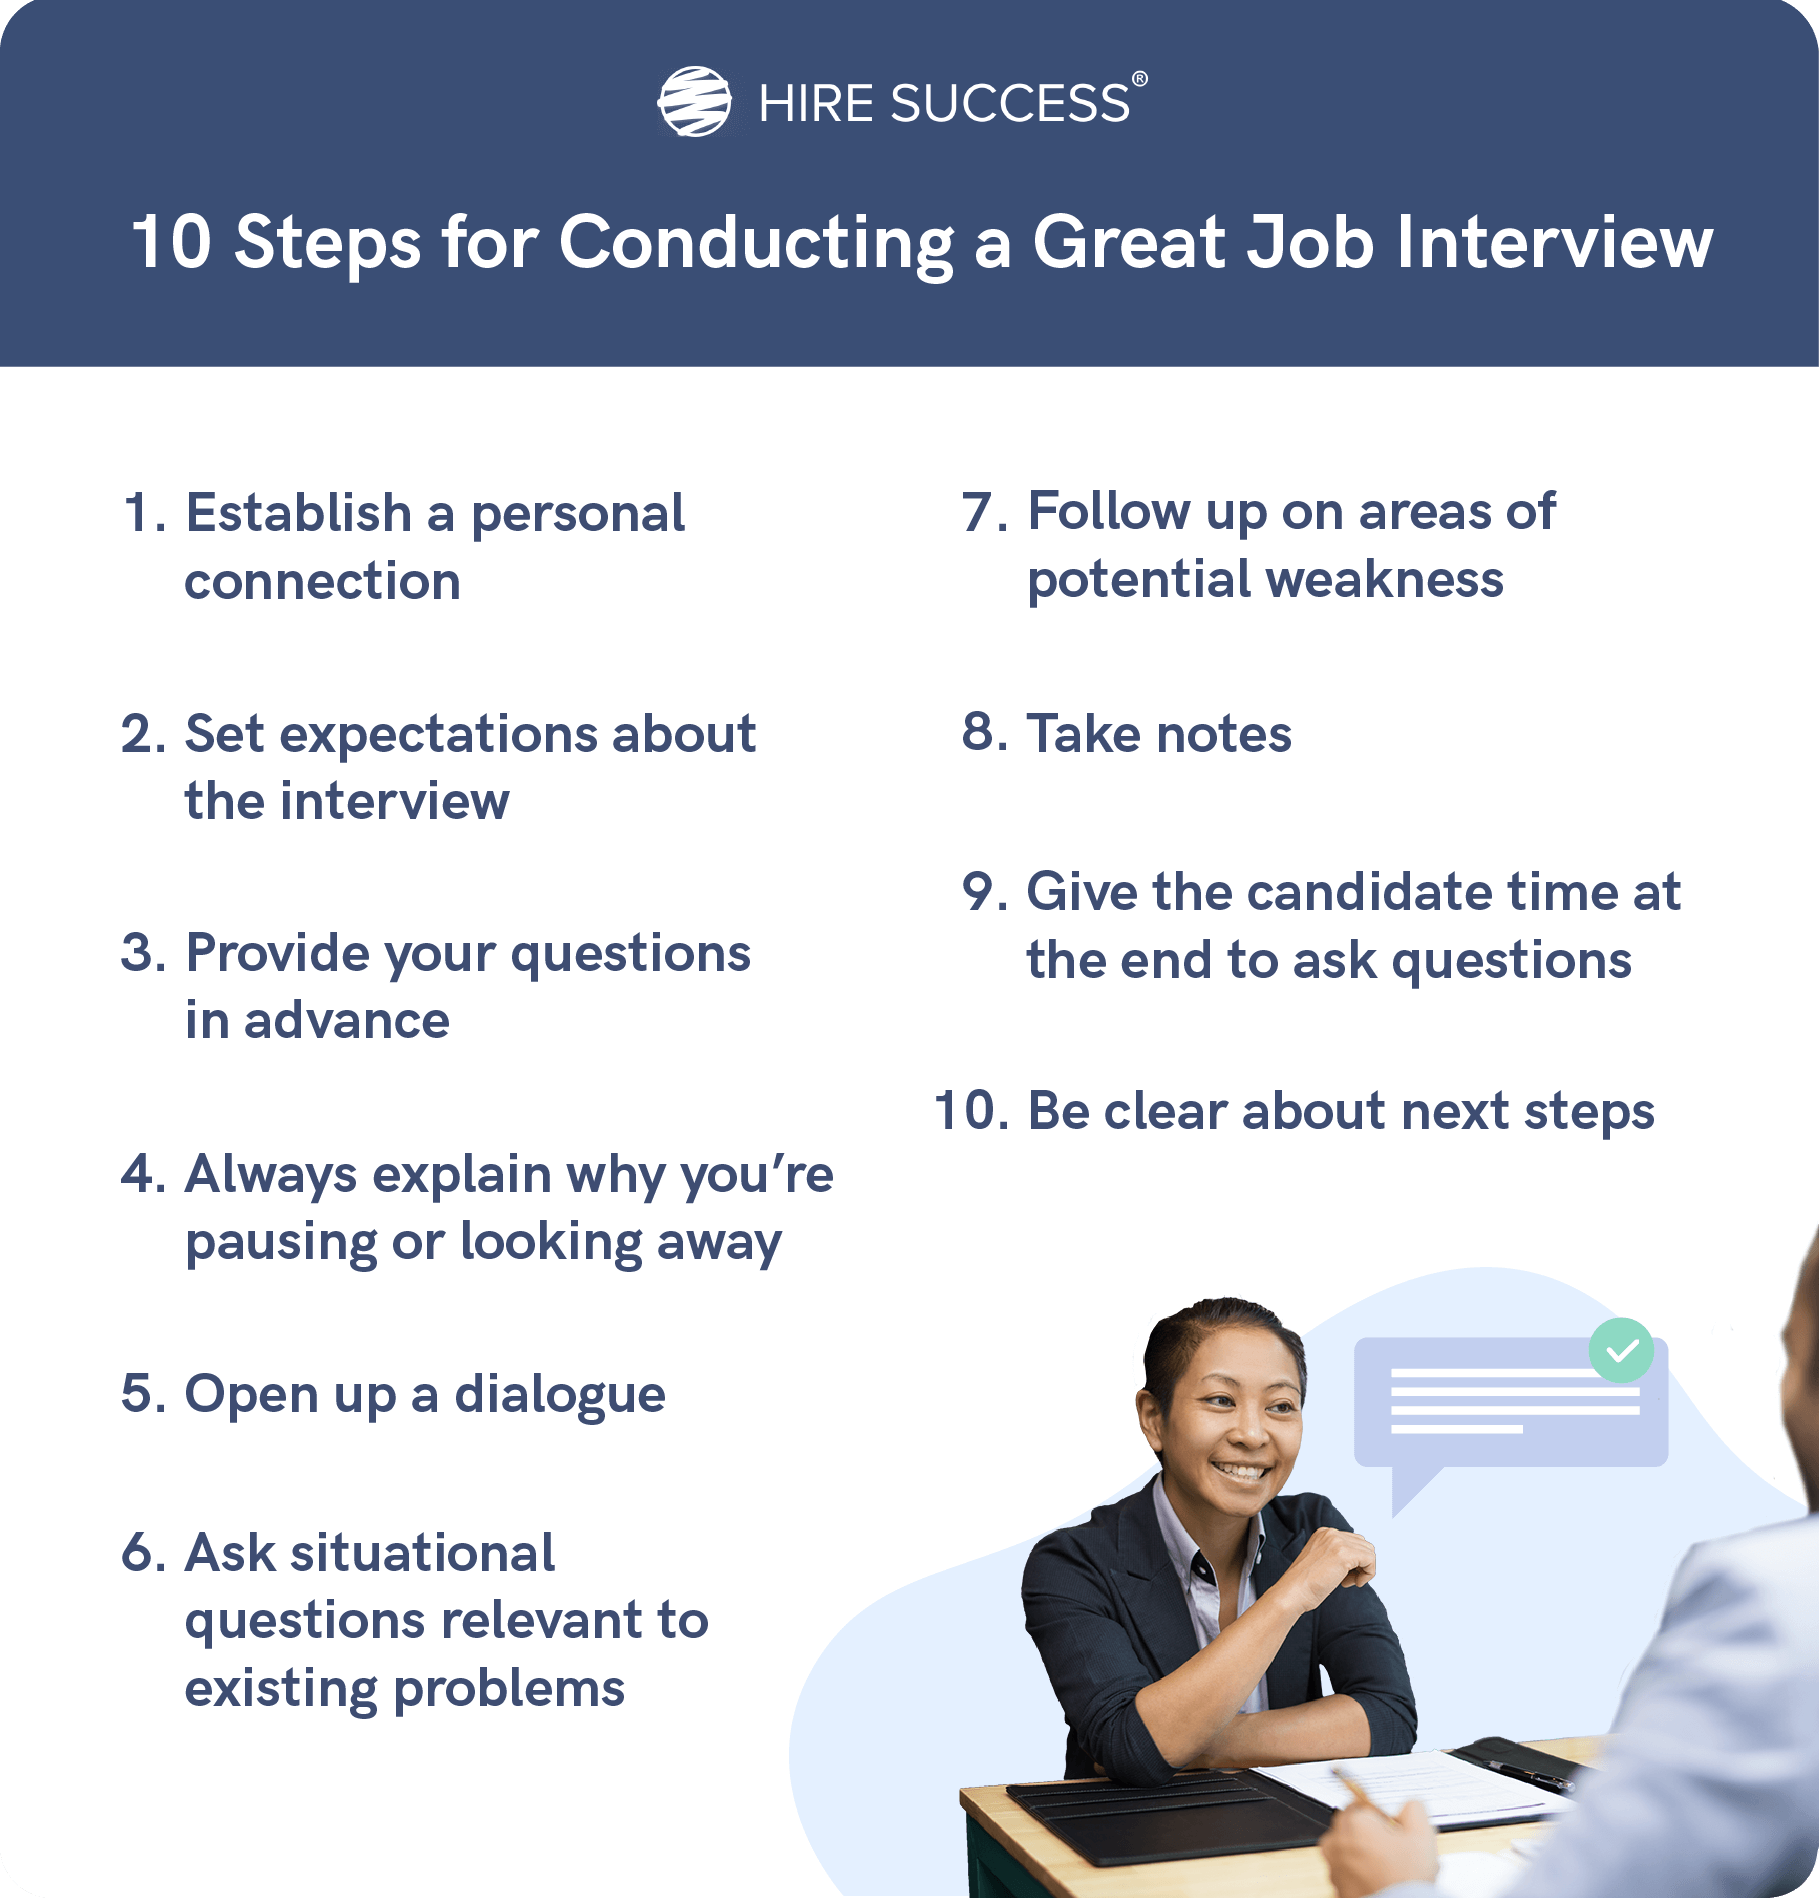 Steps for conducting a great job interview.